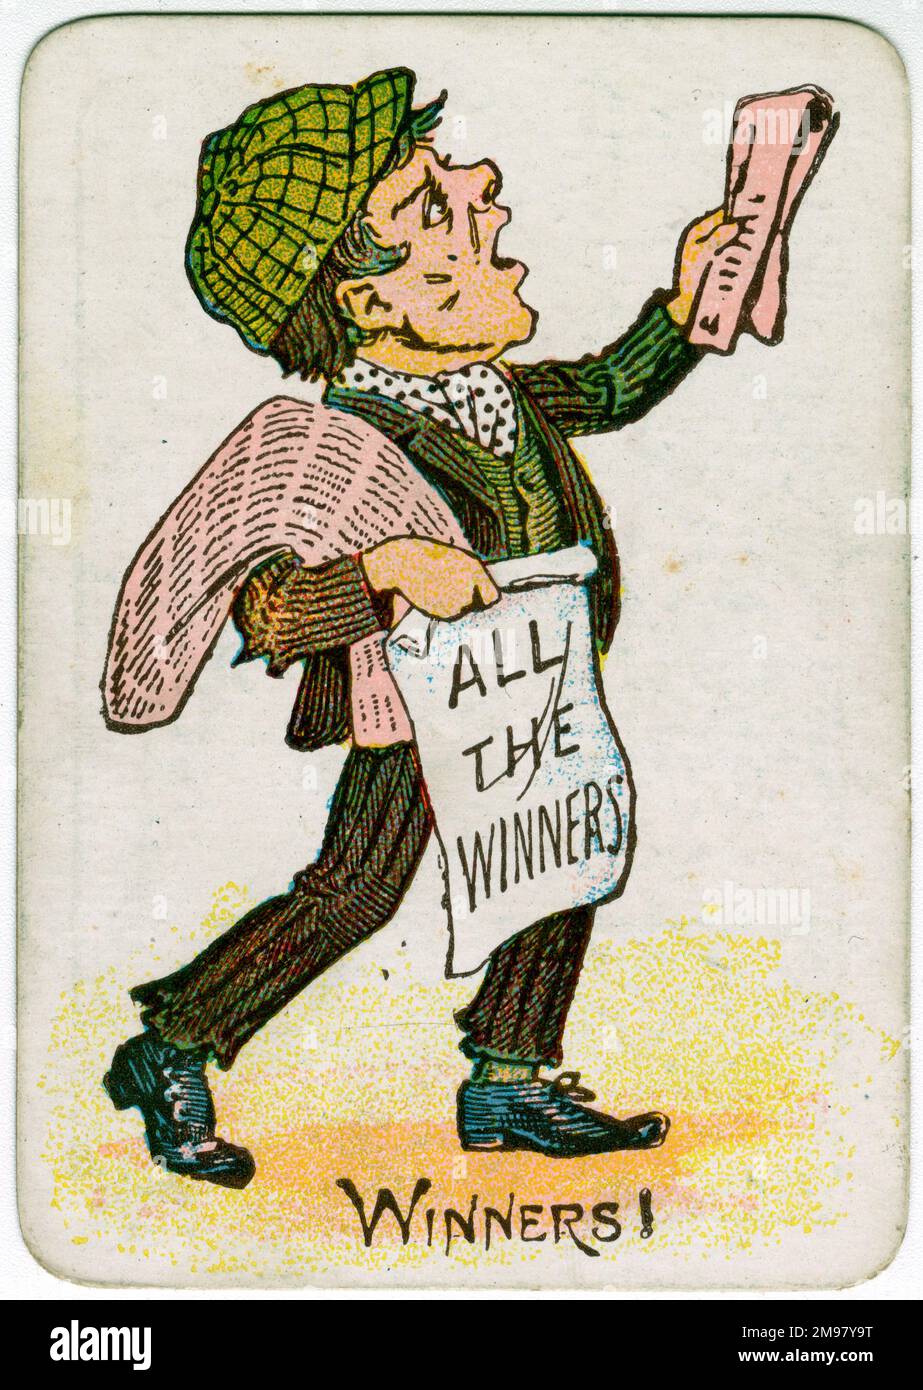 Snap Playing Card - Winners, newspaper seller. Stock Photo